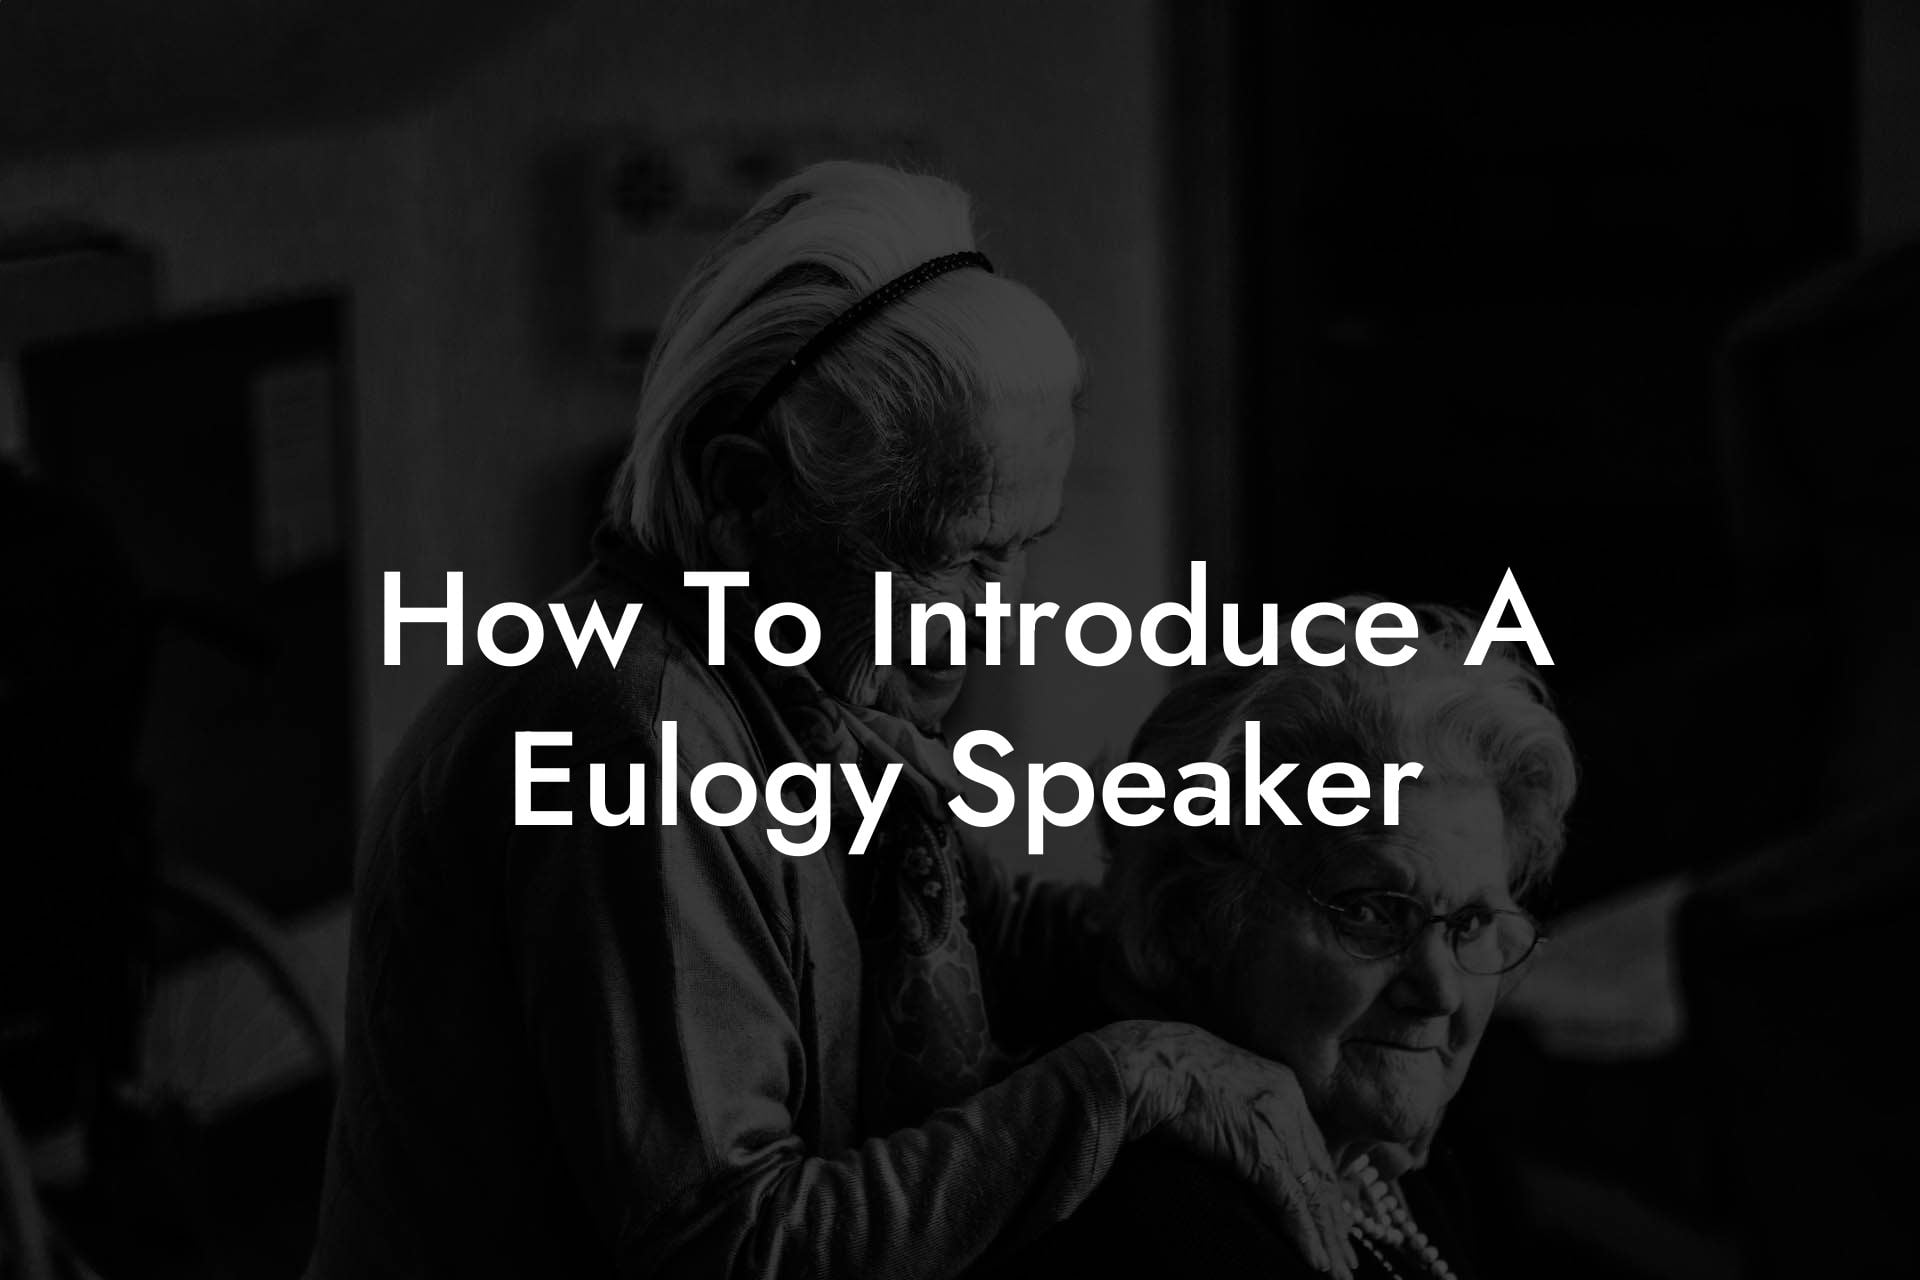 How To Introduce A Eulogy Speaker